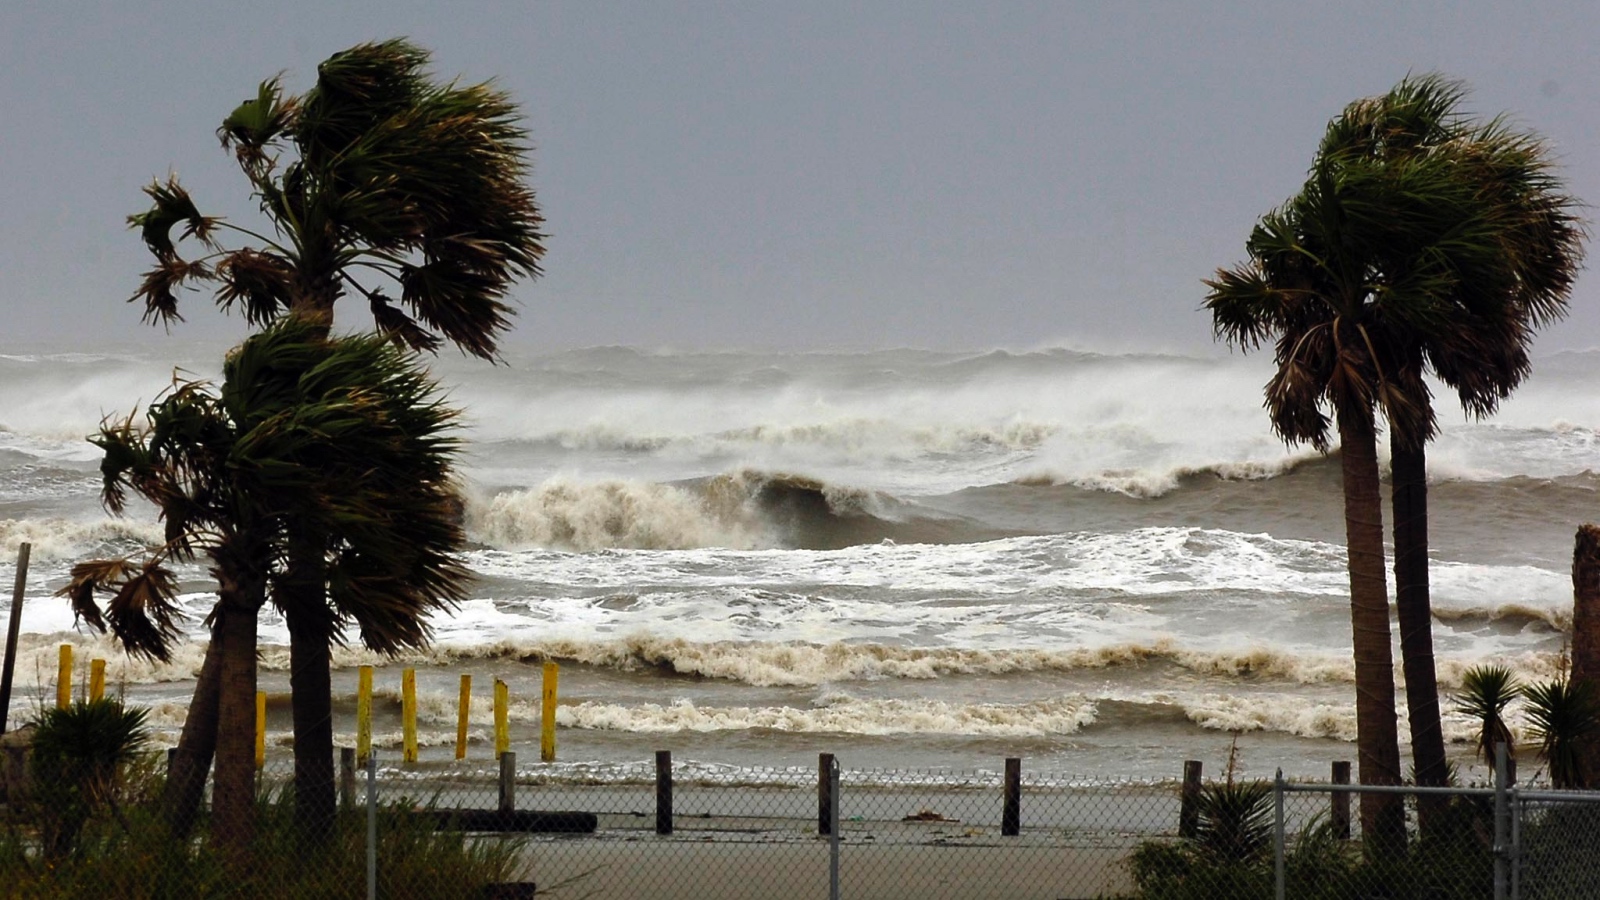 Hurricane weather with big waves and blowing palm trees